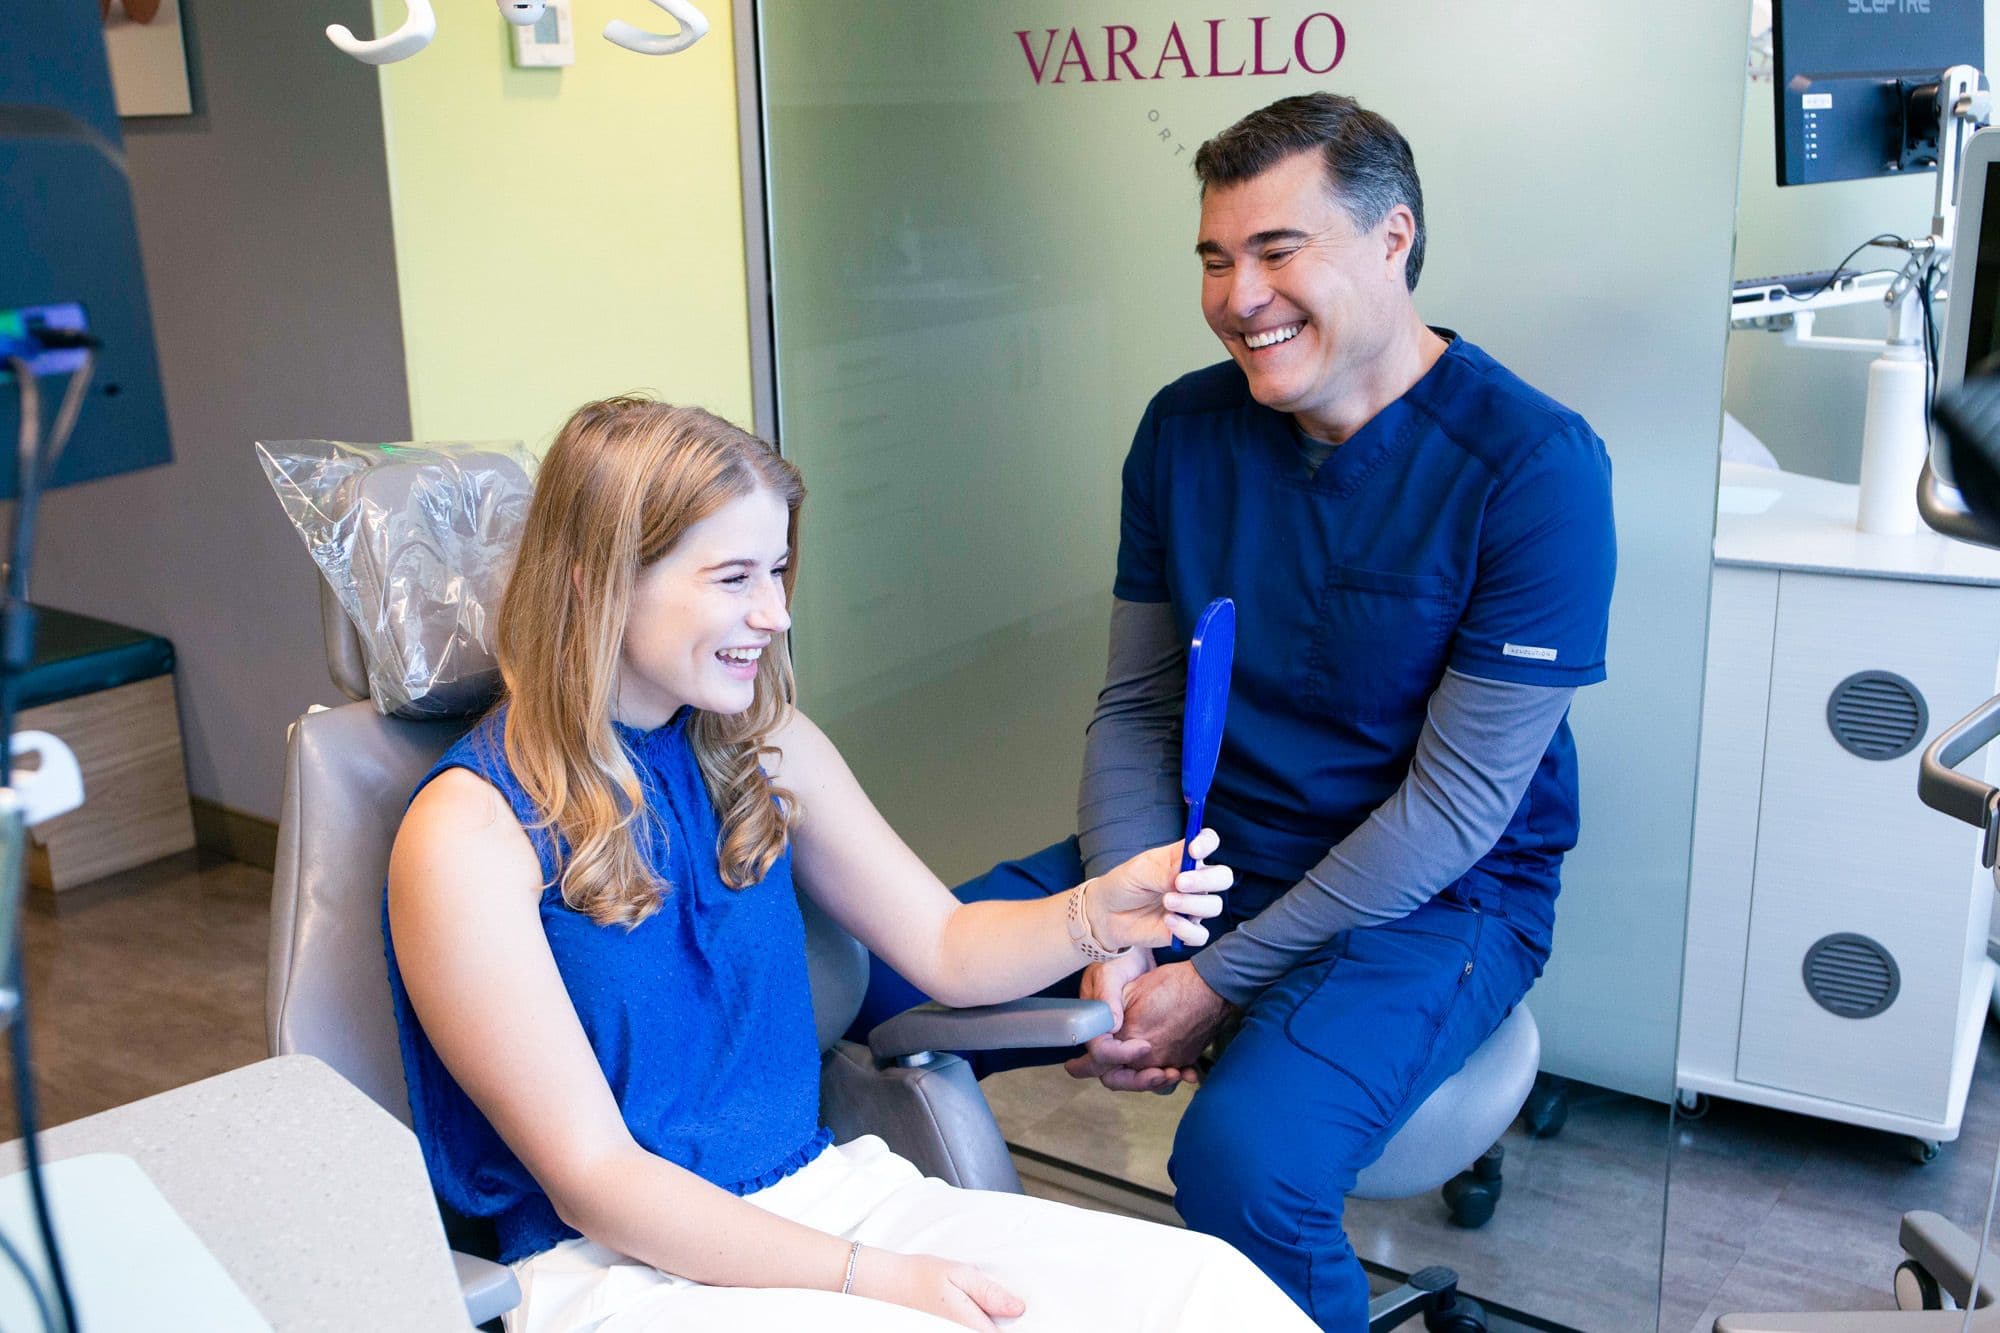 teen girl smiling during consultation with dr. varallo